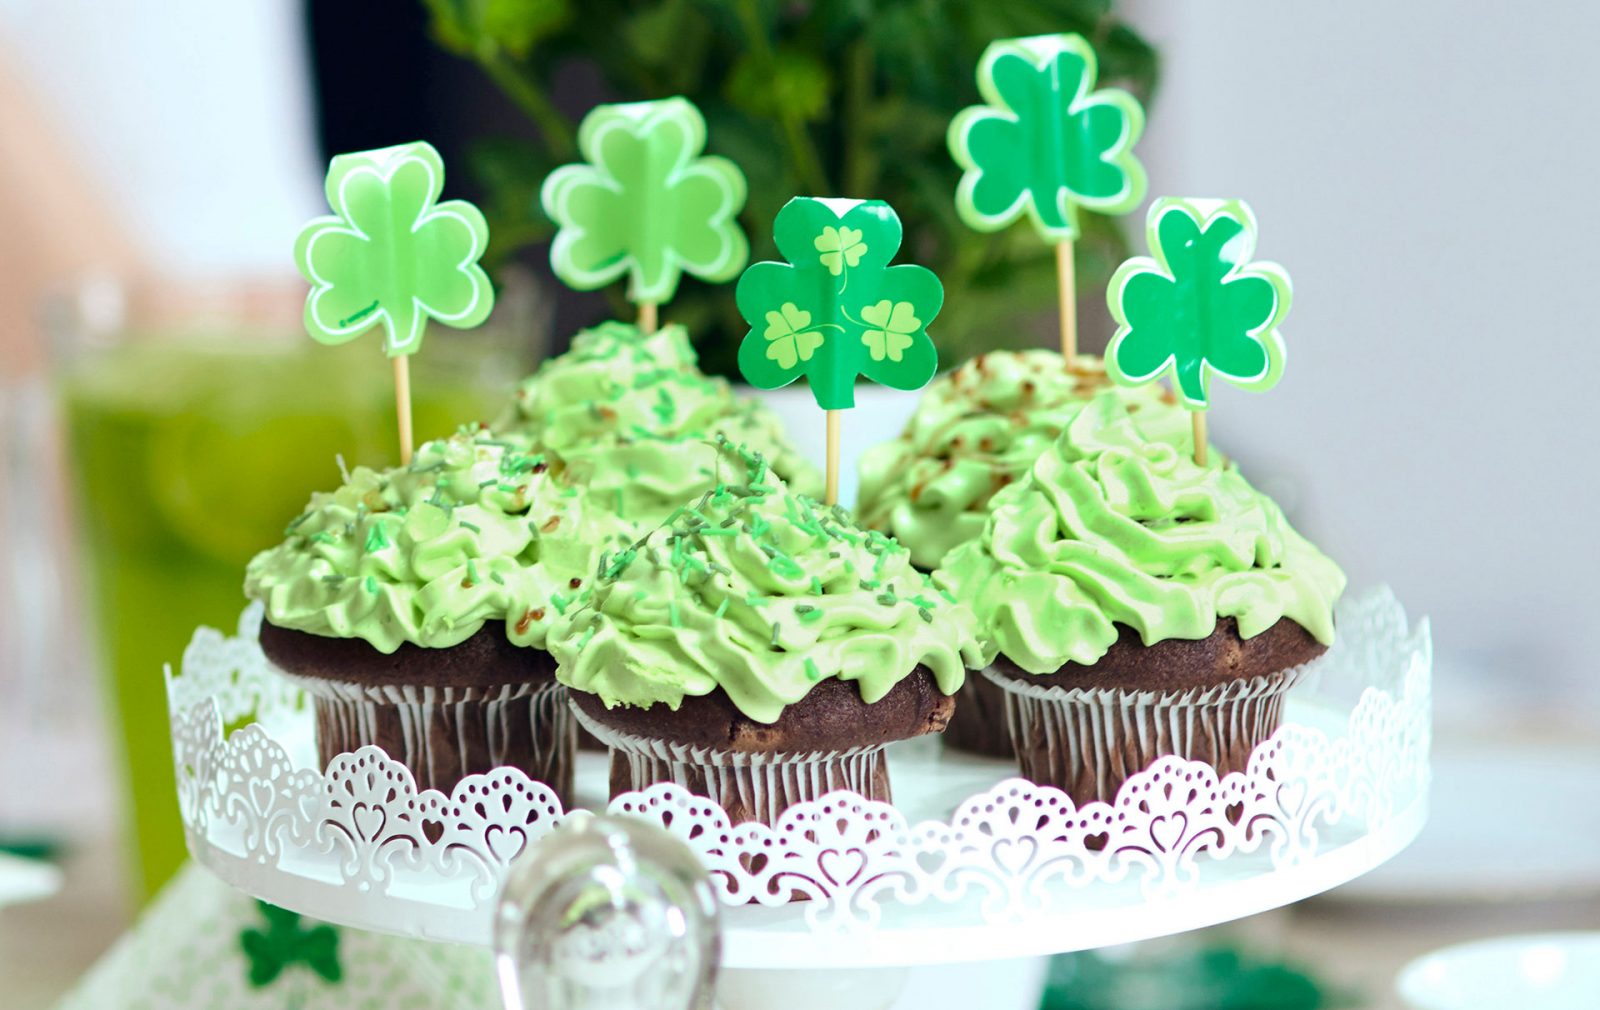 What Irish Mythological Creature Are You? St. Patrick's Day green cupcakes